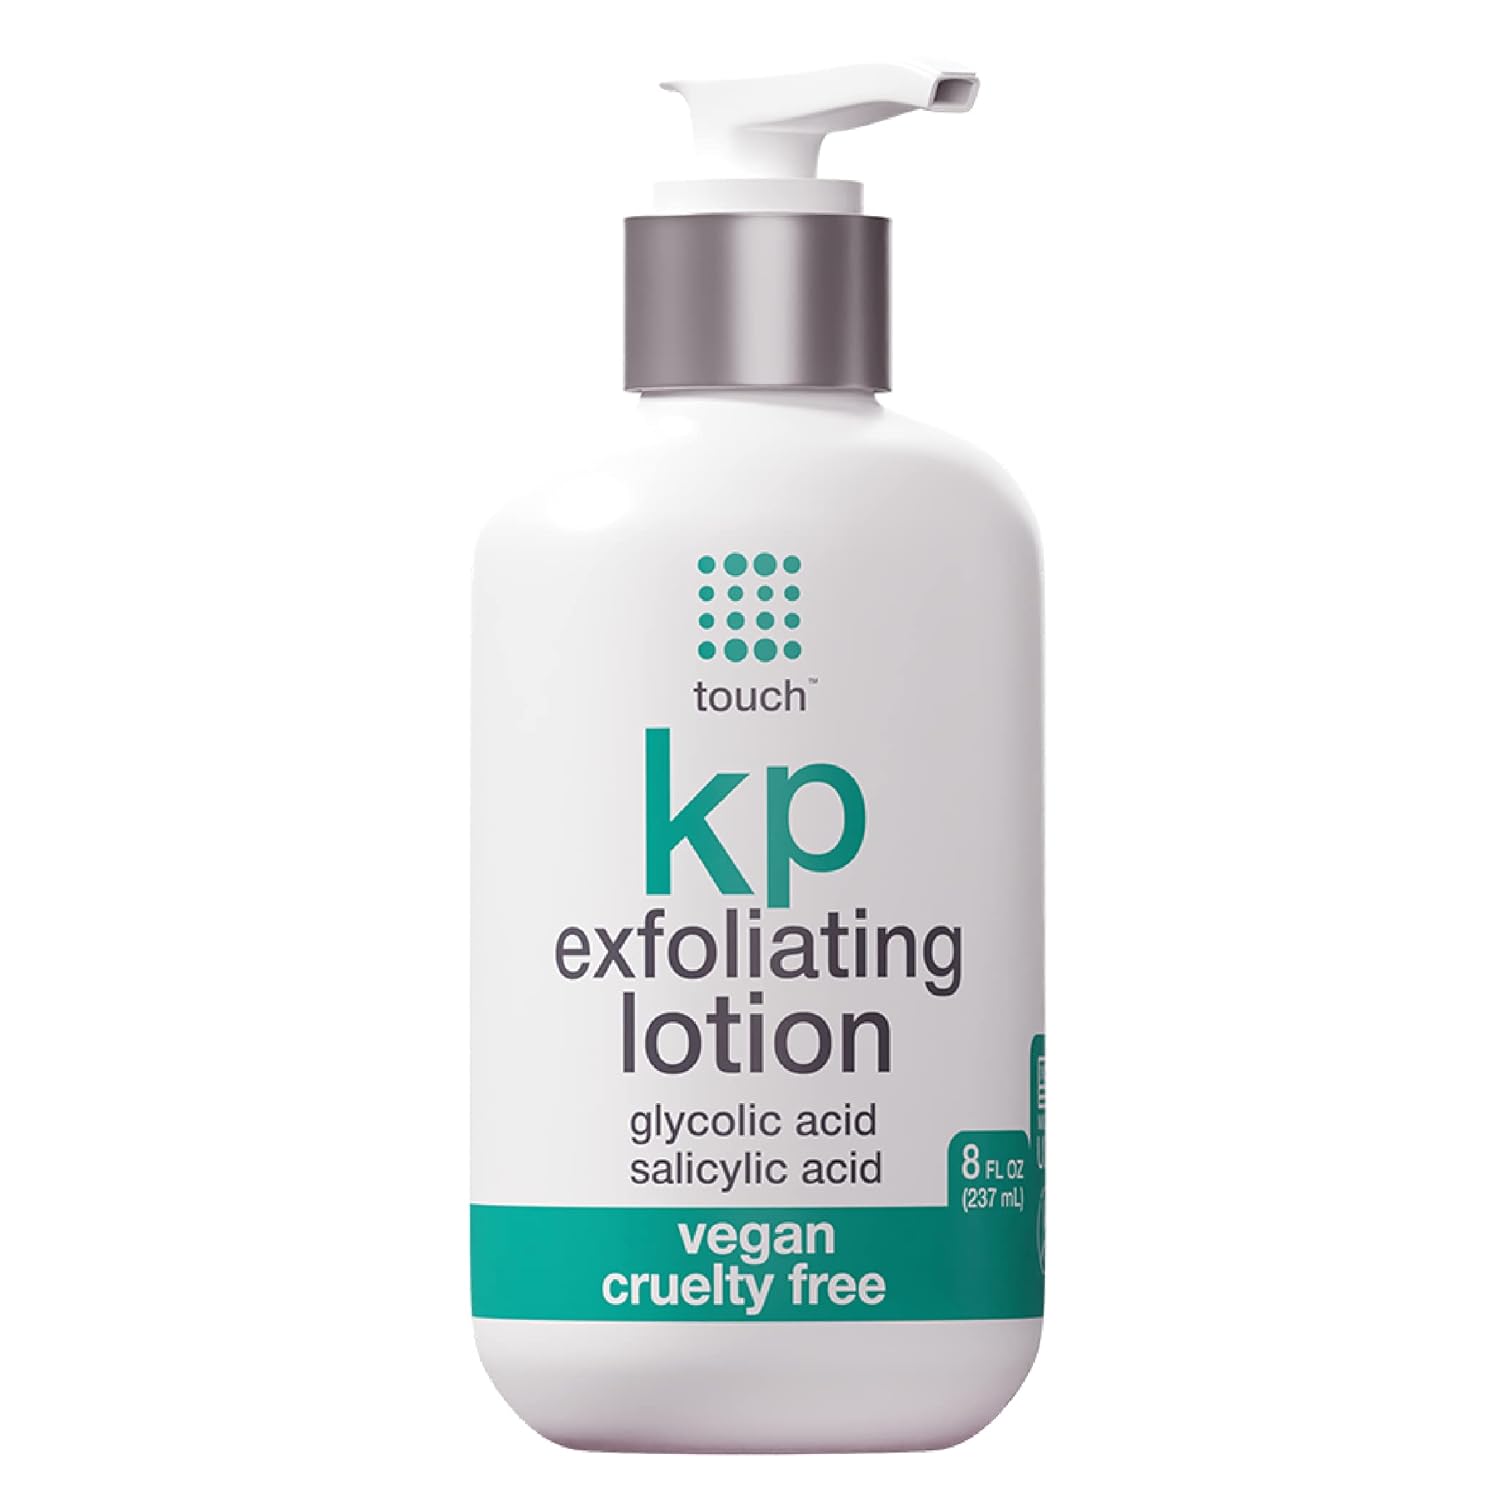 TOUCH Glycolic Acid Lotion for Keratosis Pilaris - KP Lotion Moisturizer - Glycolic Acid Body Lotion for AHA BHA Rough & Bumpy Skin- Keratosis Pilaris Exfoliating Lotion Gets Rid Of Redness - 8 Fl Oz